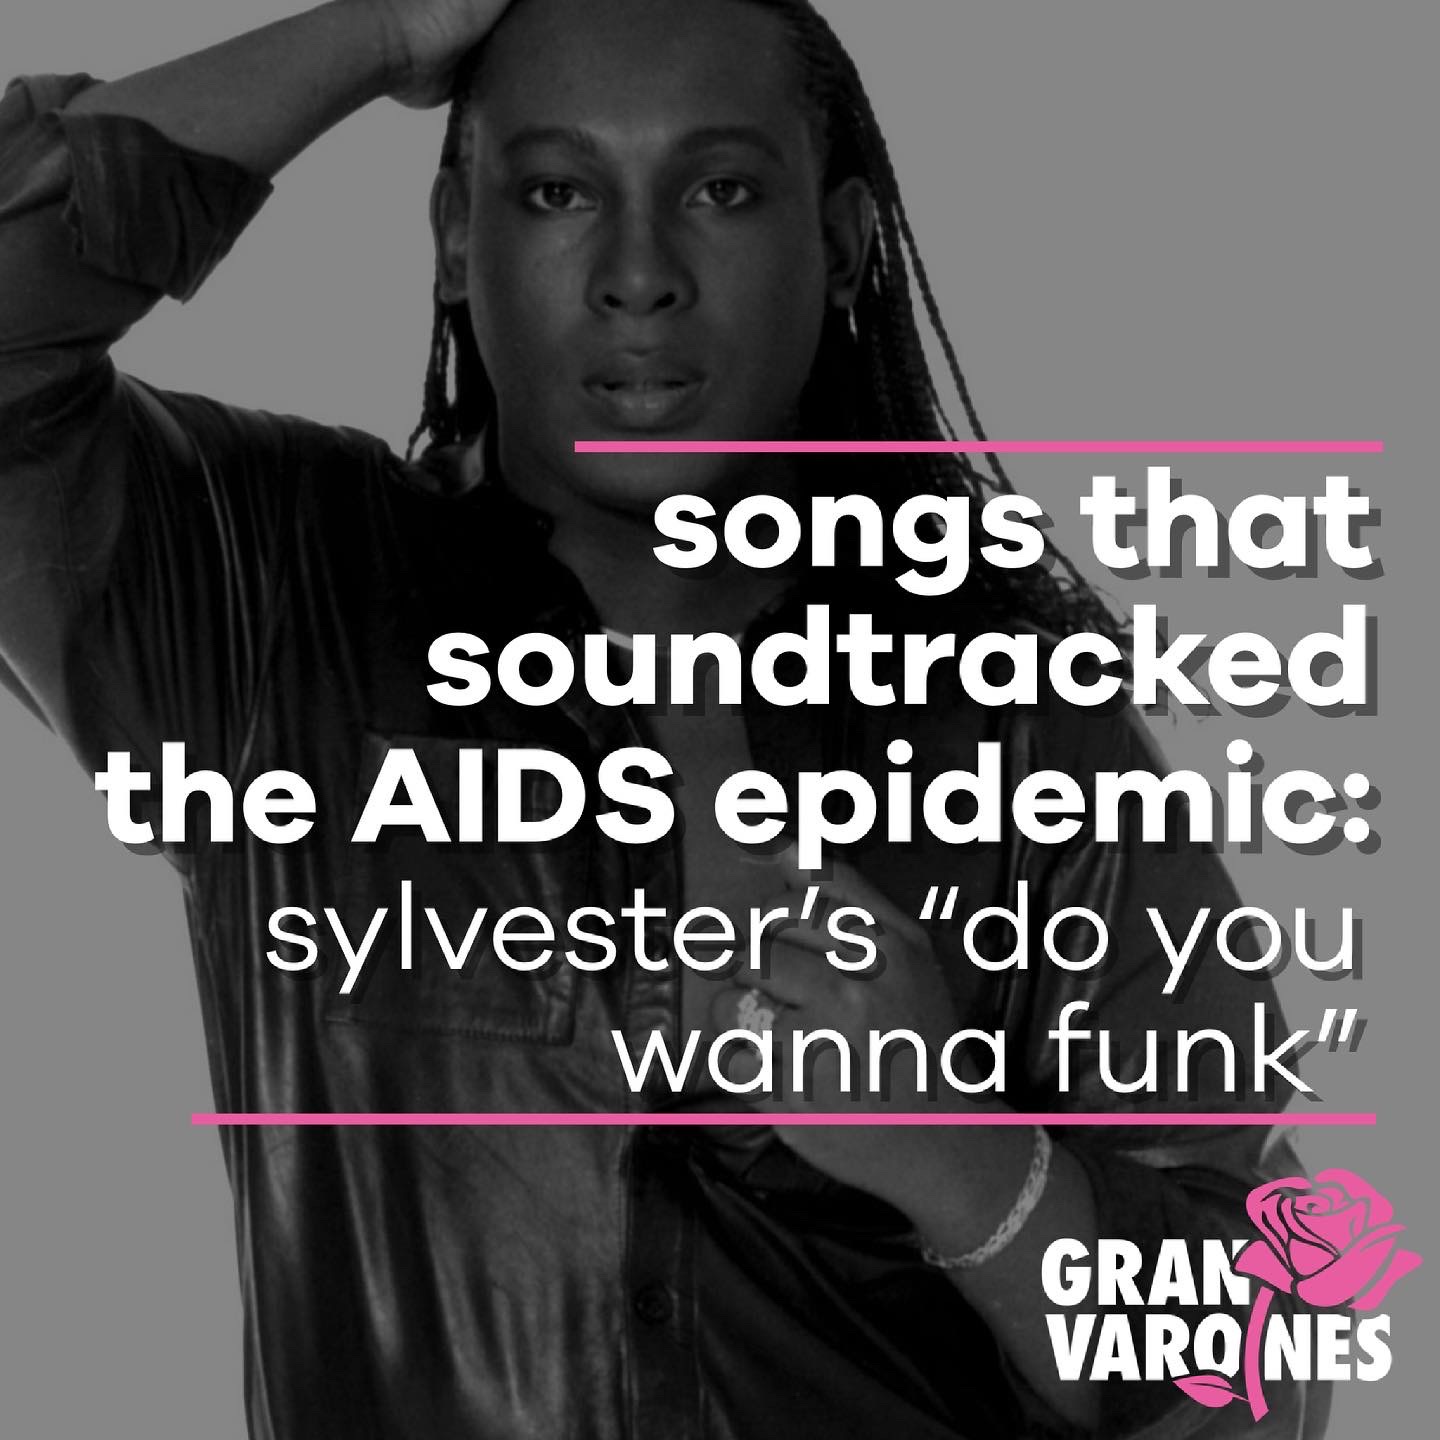 Songs That Soundtracked the AIDS Epidemic: Sylvester’s “Do You Wanna Funk”